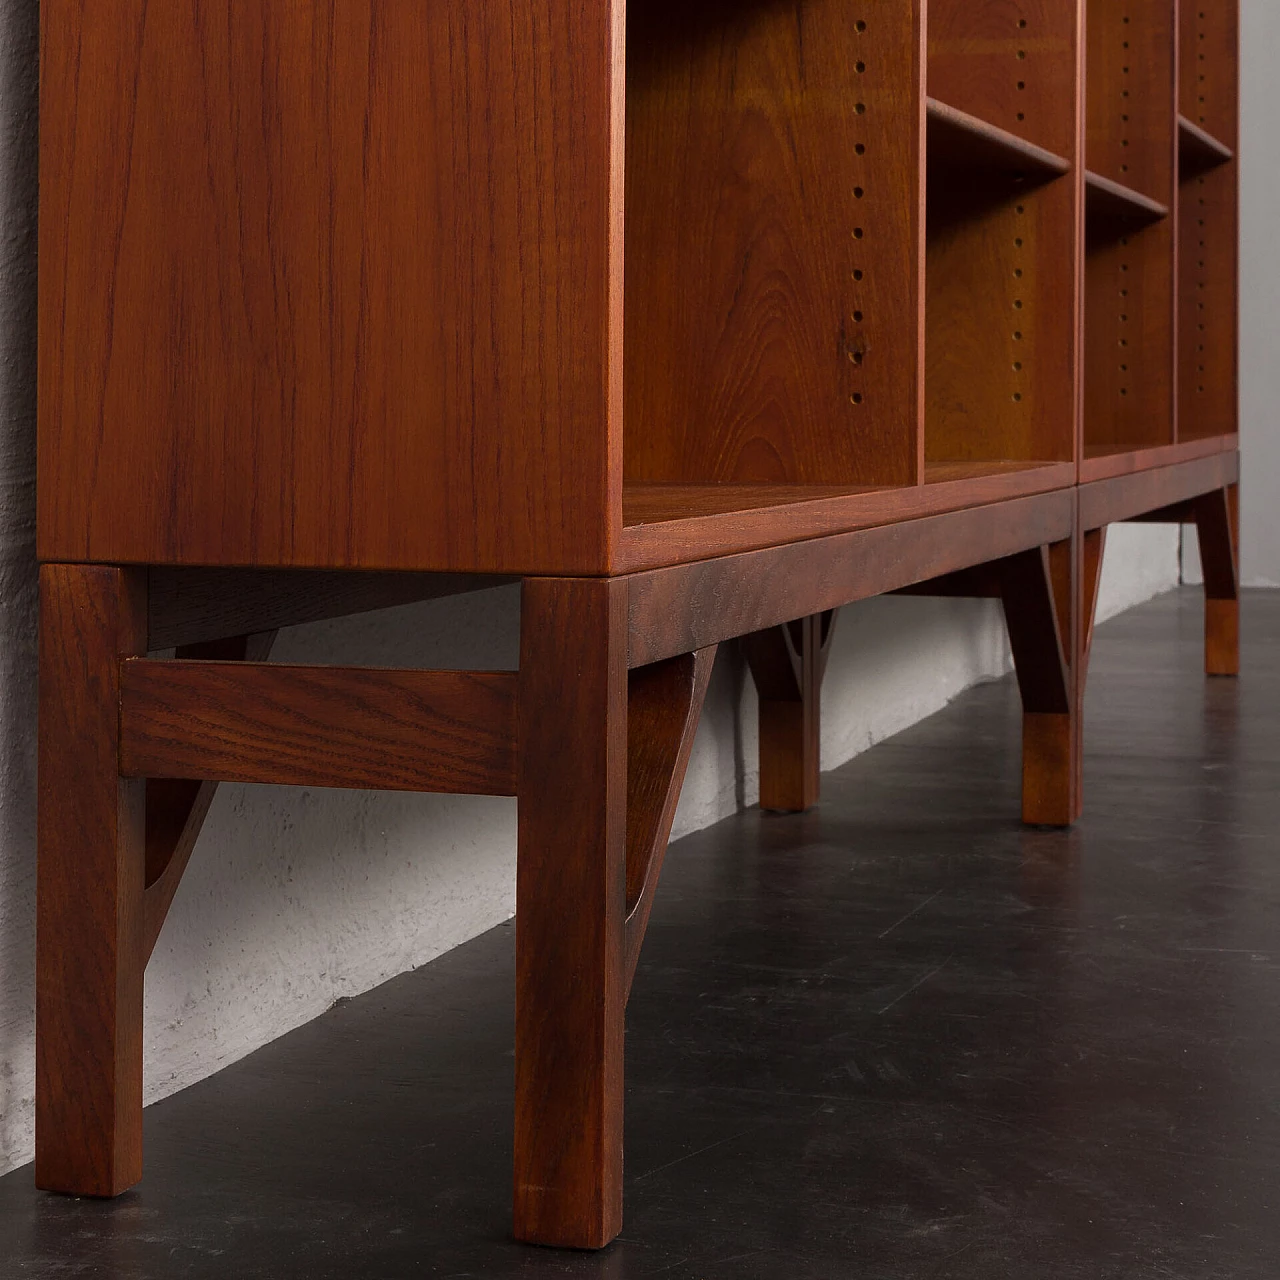 China bookcase by Børge Mogensen for C. M. Madsen, 1960s 9